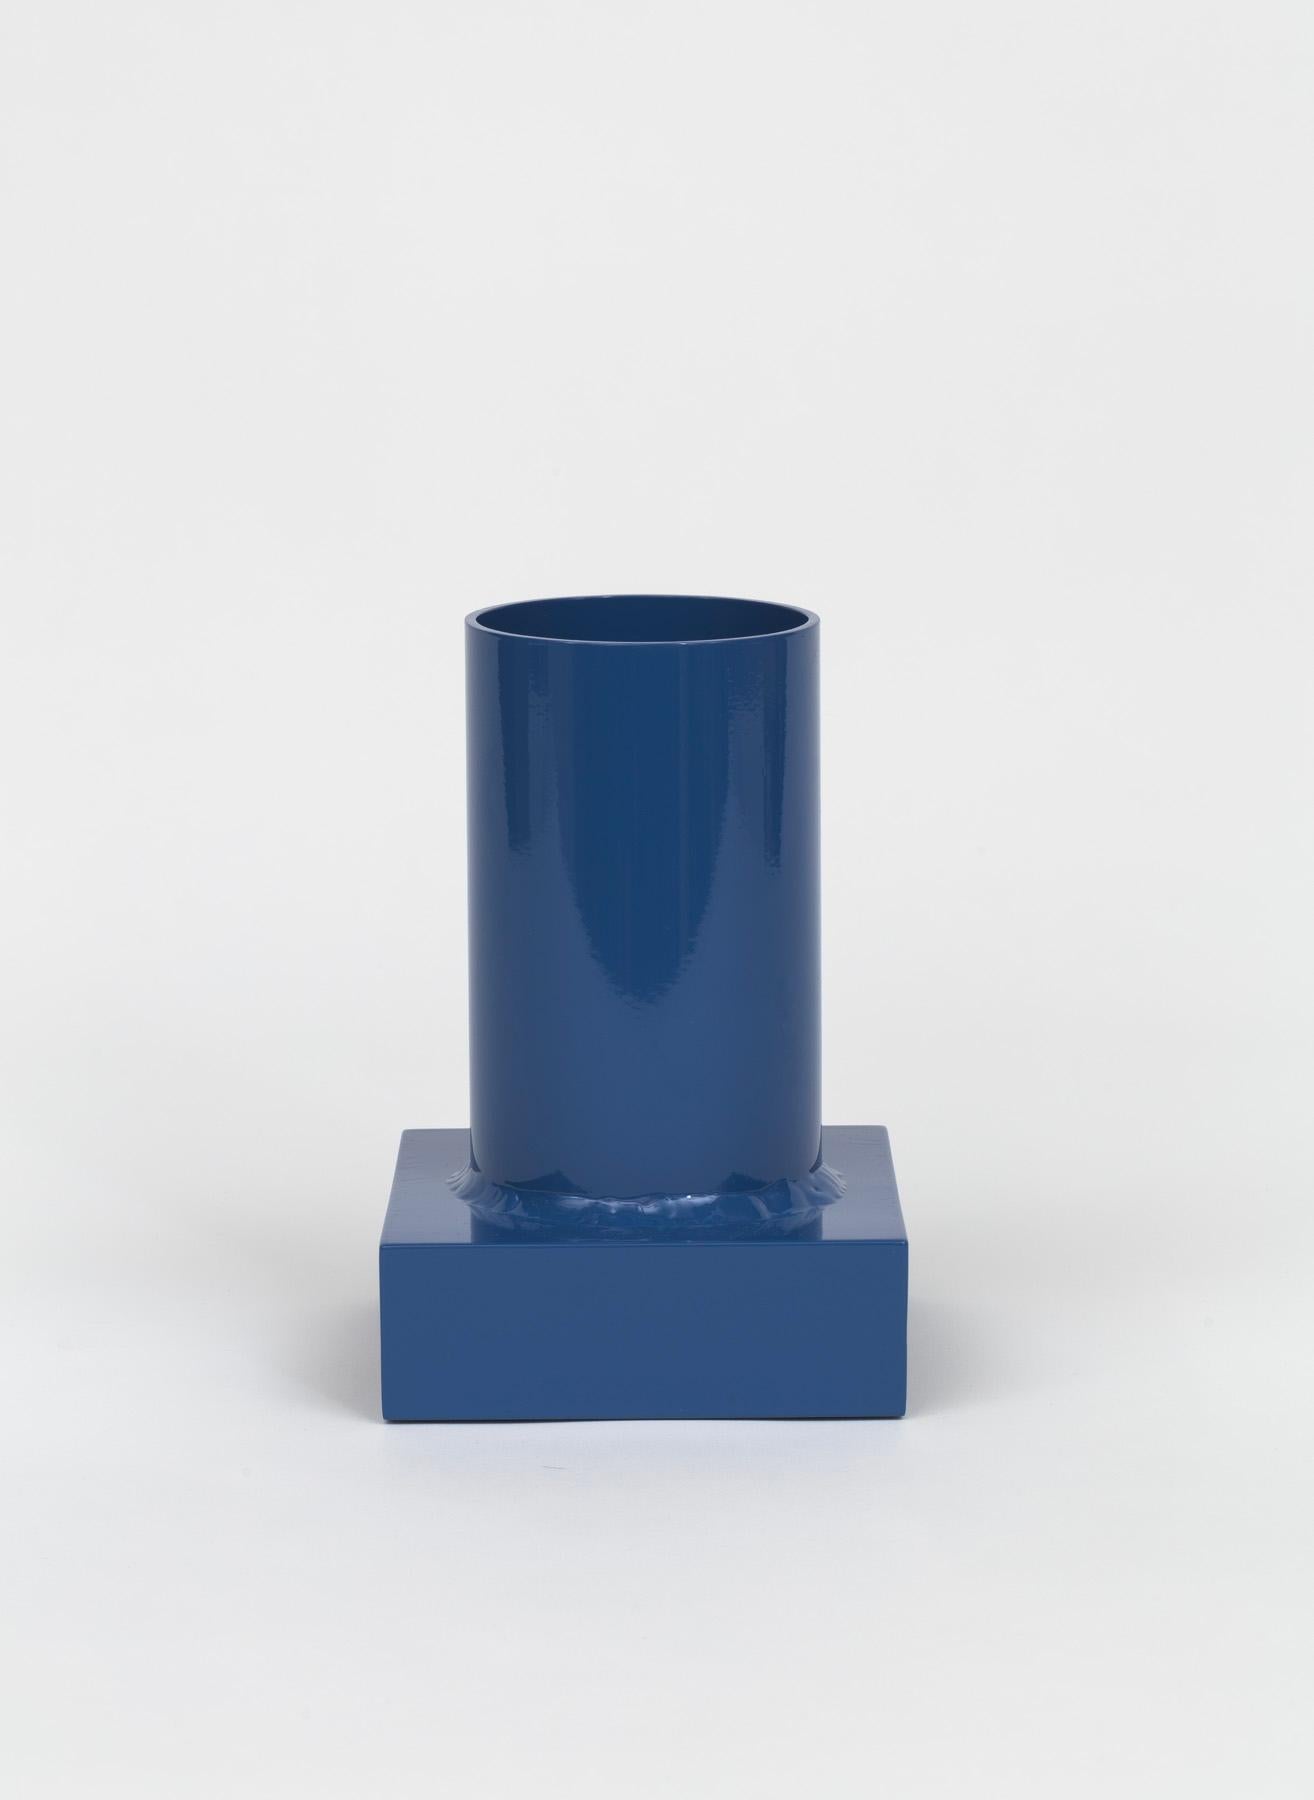 Modern Brute Tube Vase 002 in Deep Adult Blue Powder-Coated Aluminum, Limited Edition For Sale